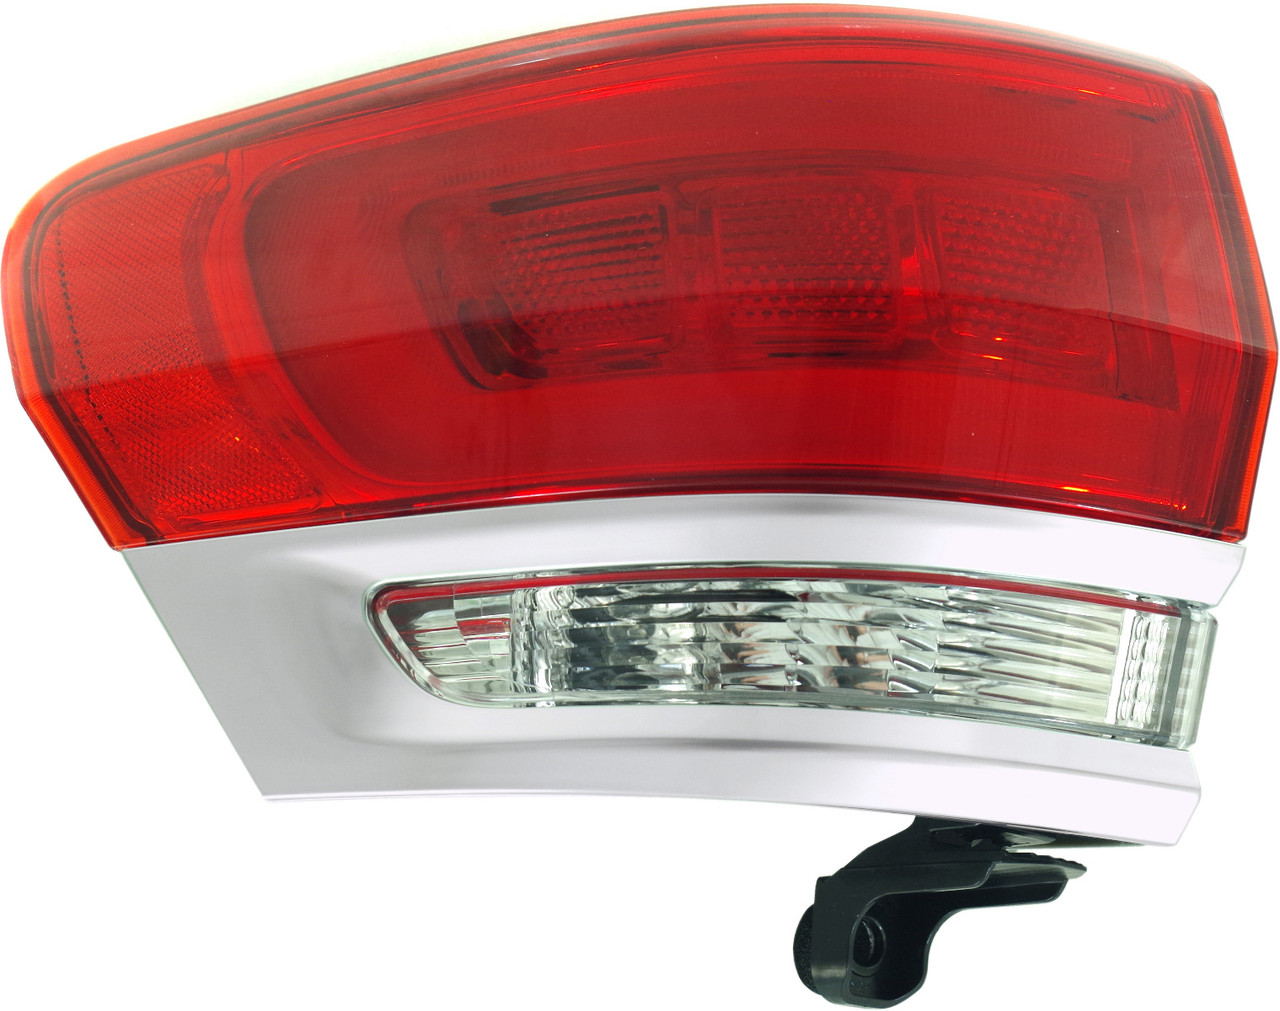 GRAND CHEROKEE WK 14-22 TAIL LAMP LH, Outer, Assy, Laredo/Limited/Overland/Summit Models, w/ Platinum Insert